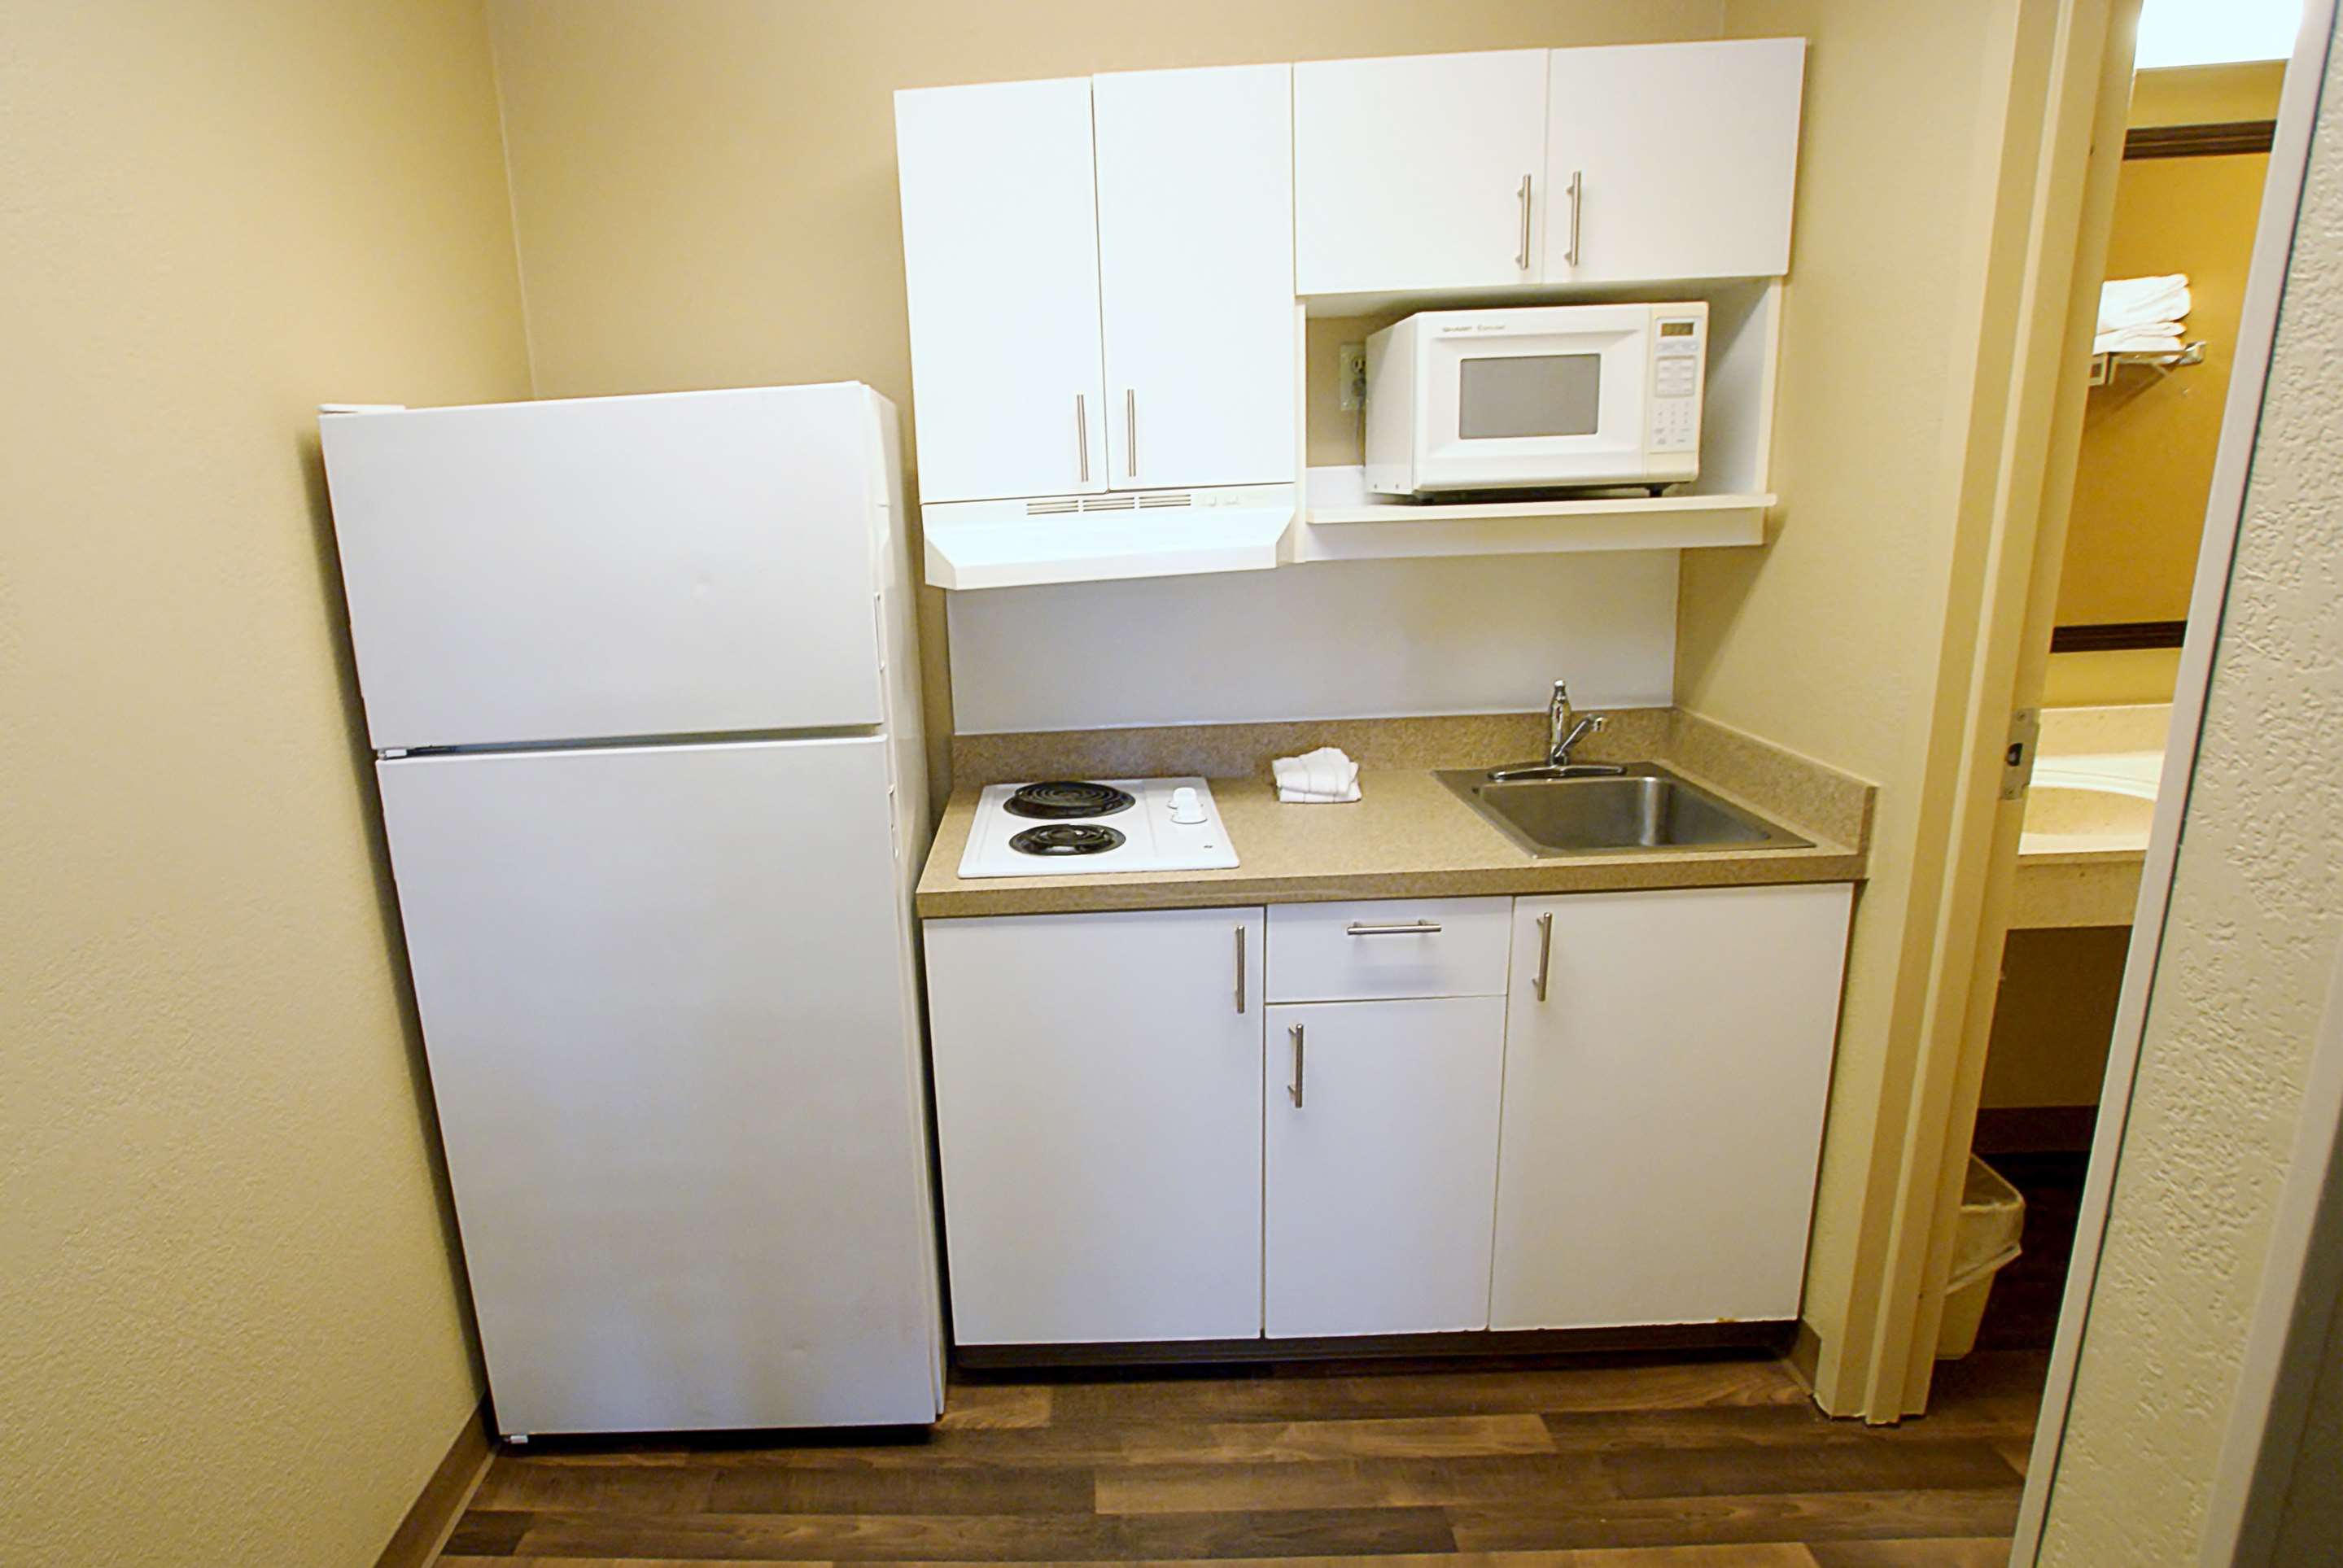 Extended Stay America - Denver - Lakewood South